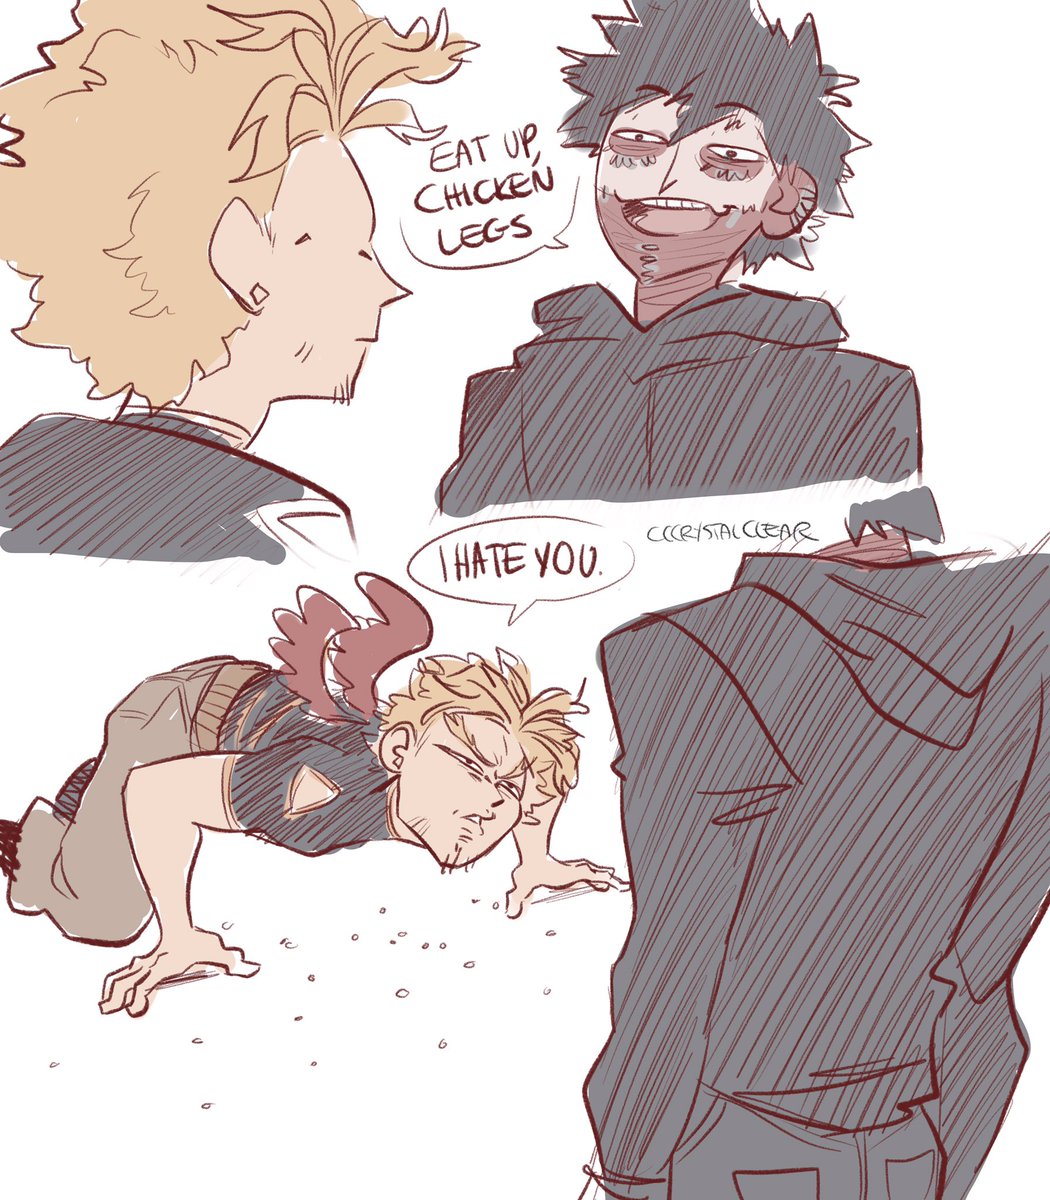 Do you want some salt with that corn? #dabihawks 